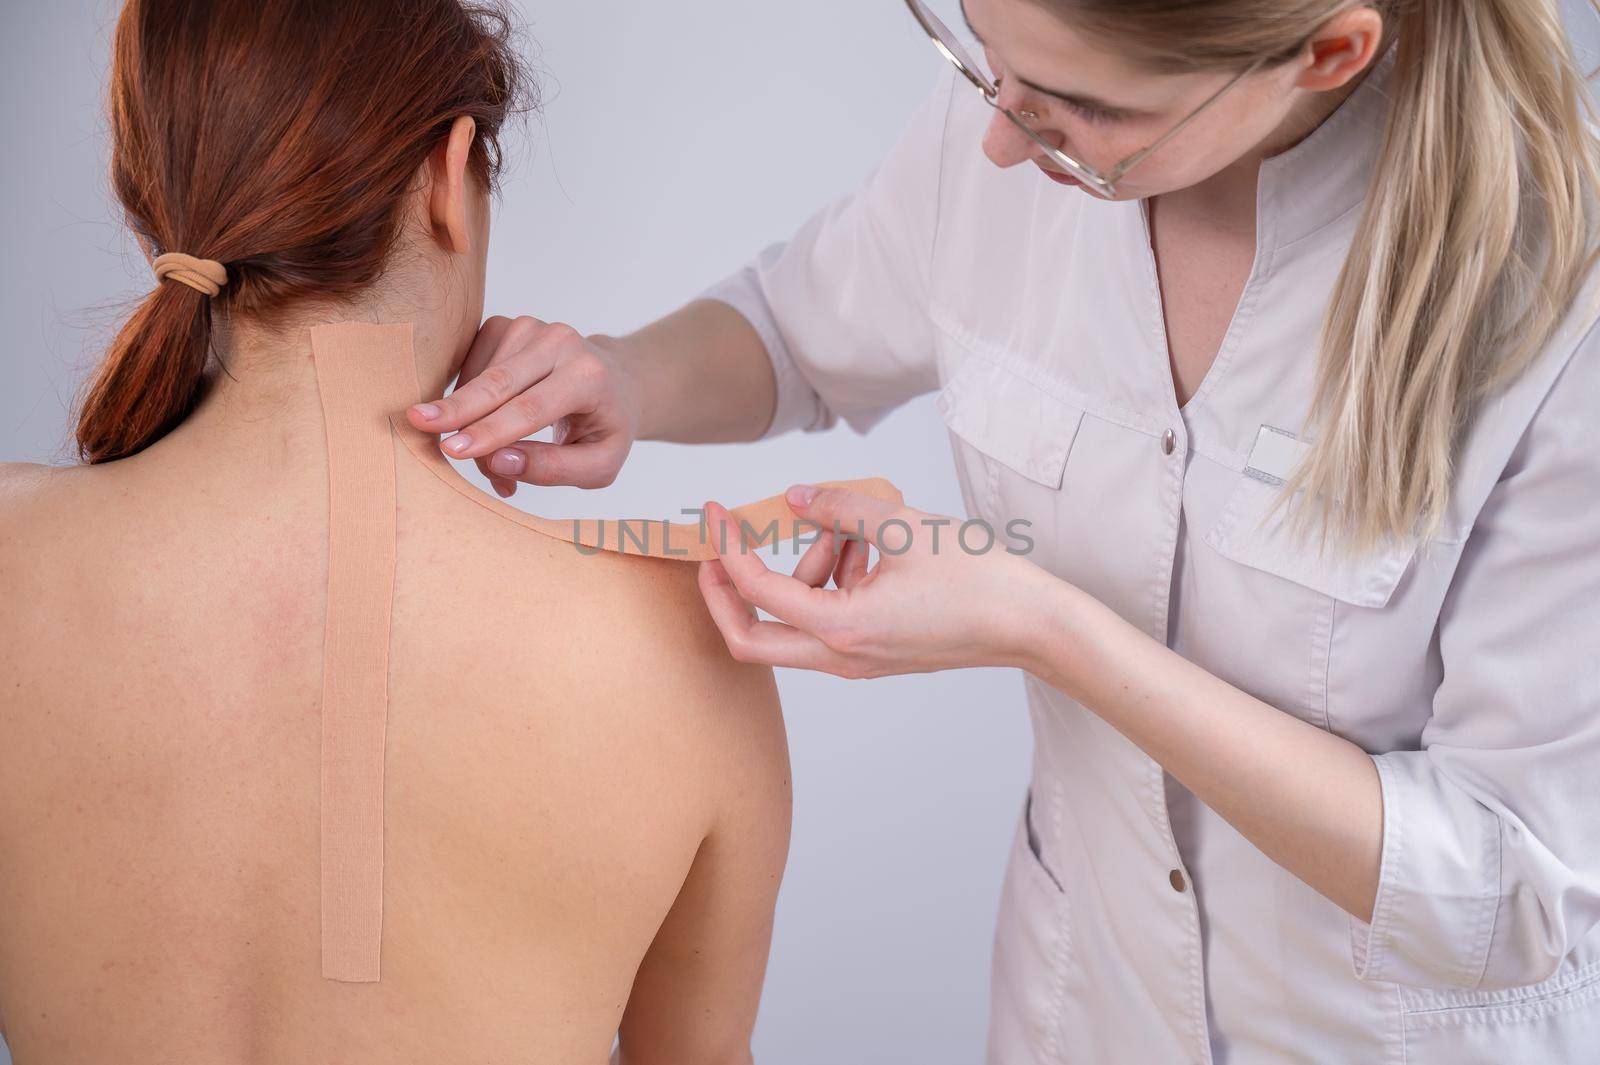 Female doctor glues kinesio tapes on the patient's shoulder